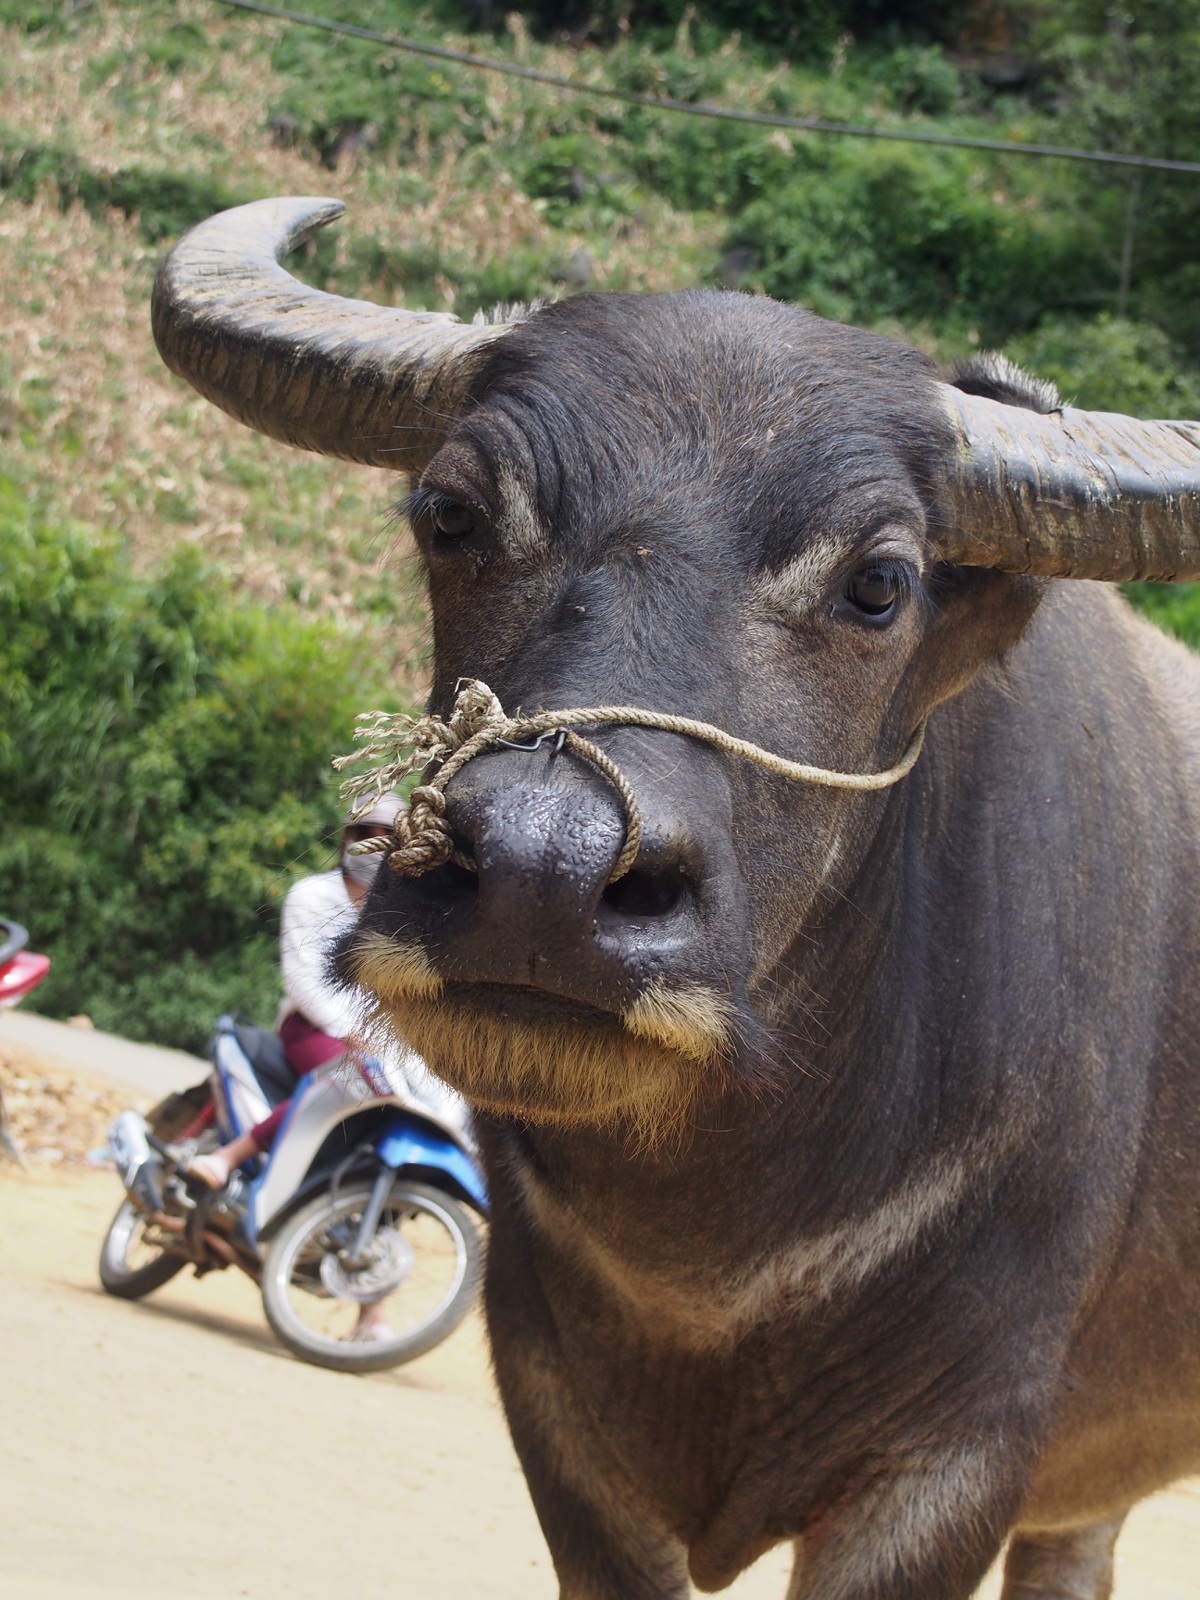 Meeting the locals in Sapa